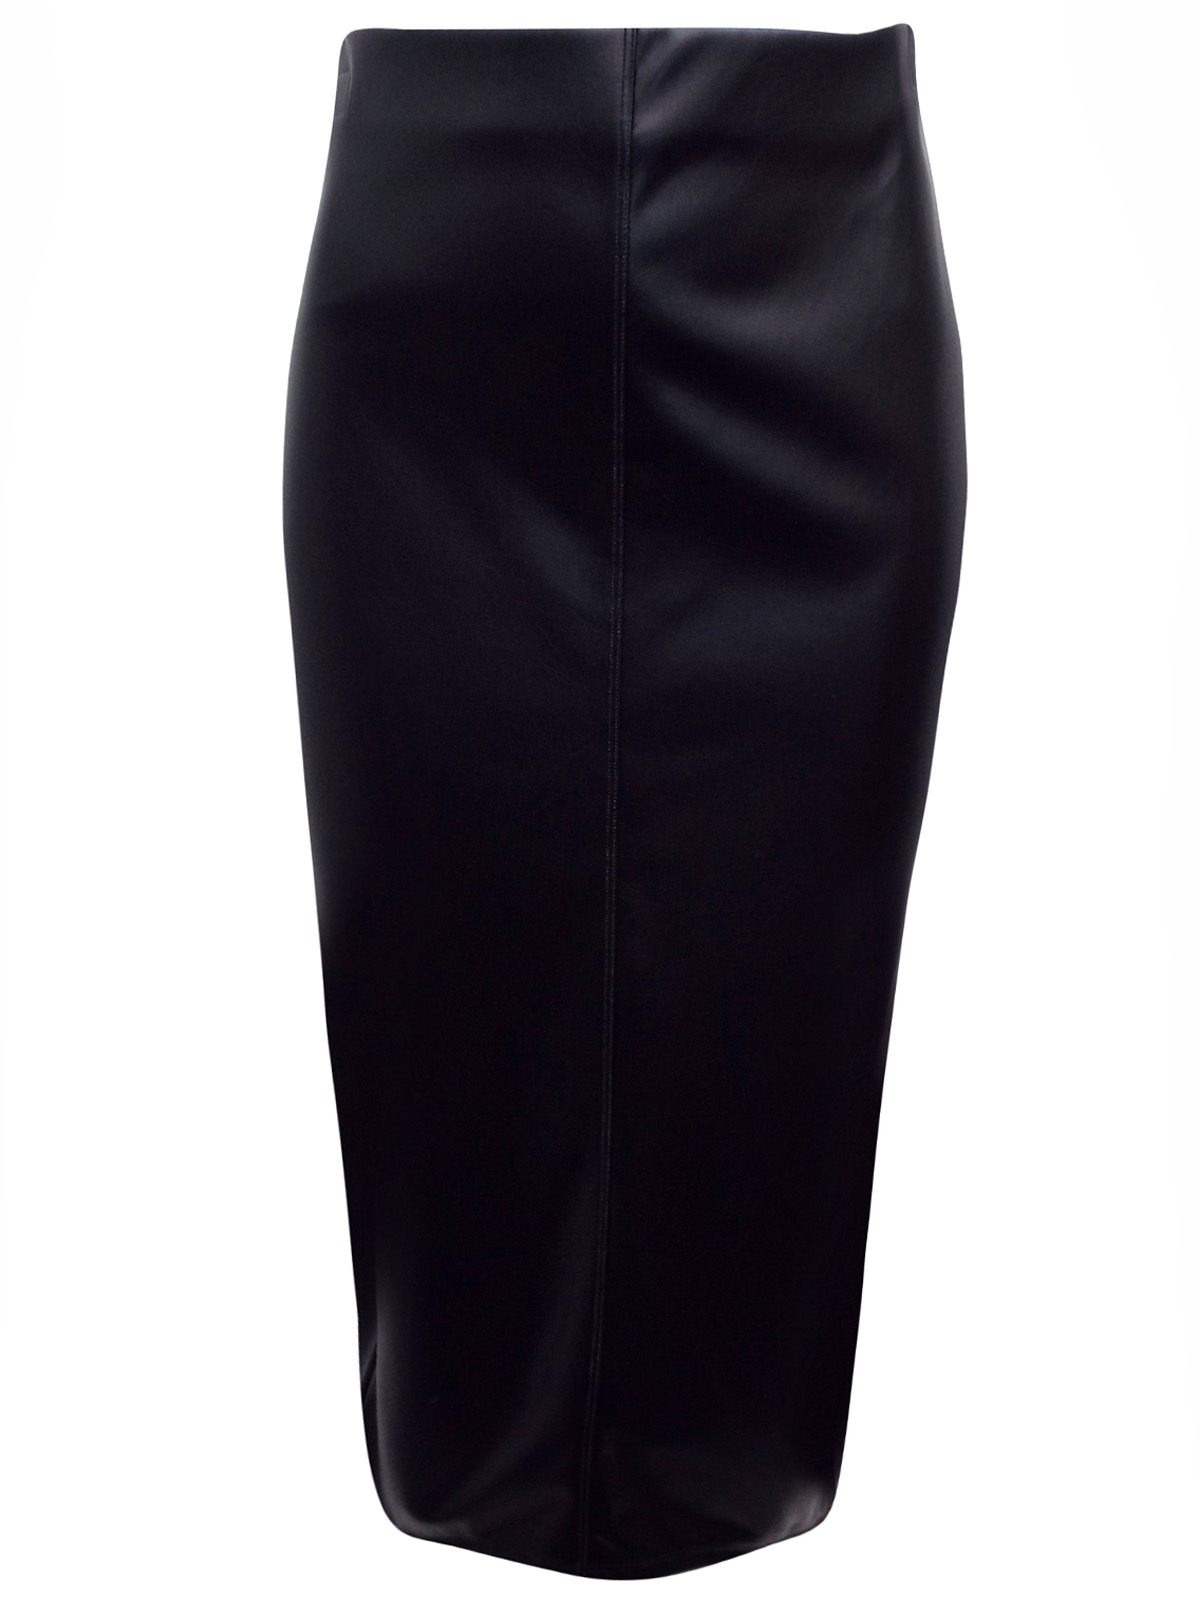 //text.. - - BLACK Leather Look Midi Pencil Skirt - Size 12 to 14